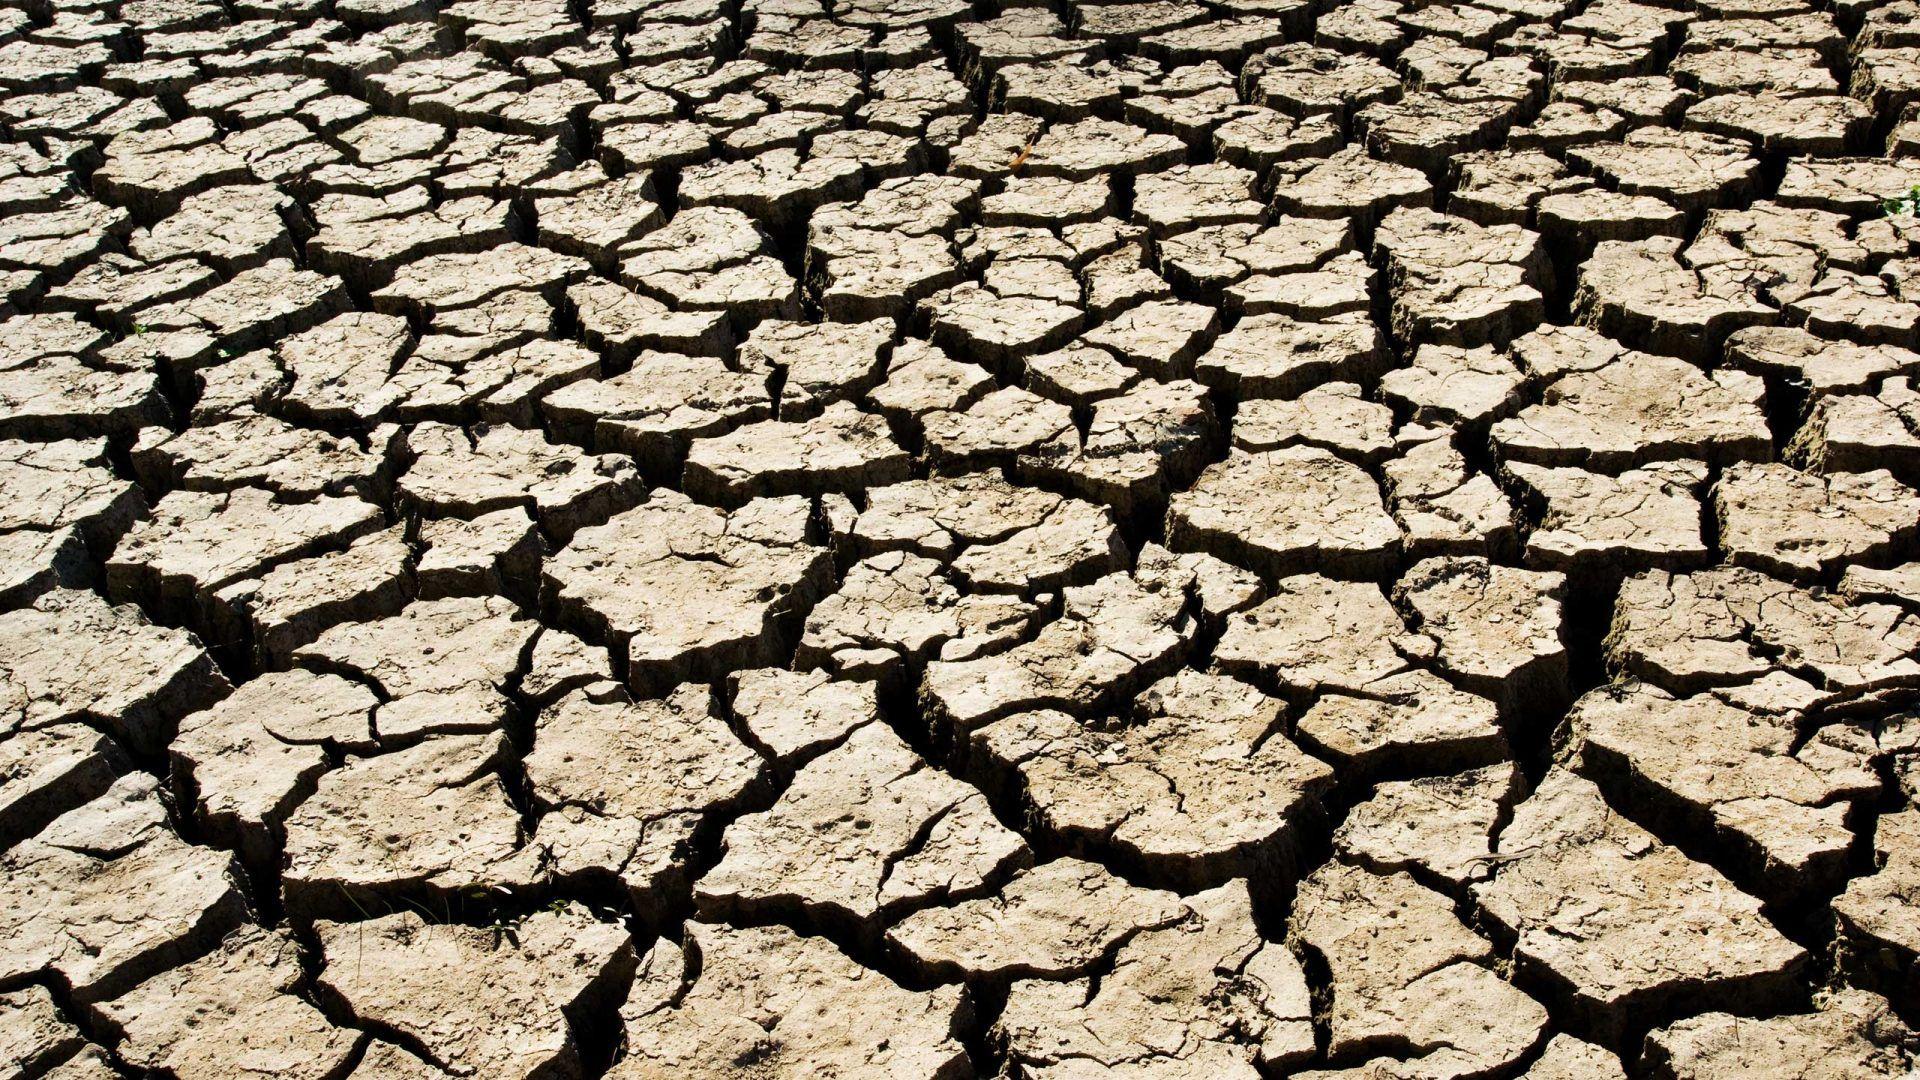 Other: Dryness Drought Nature Earth High Quality Wallpaper for HD 16